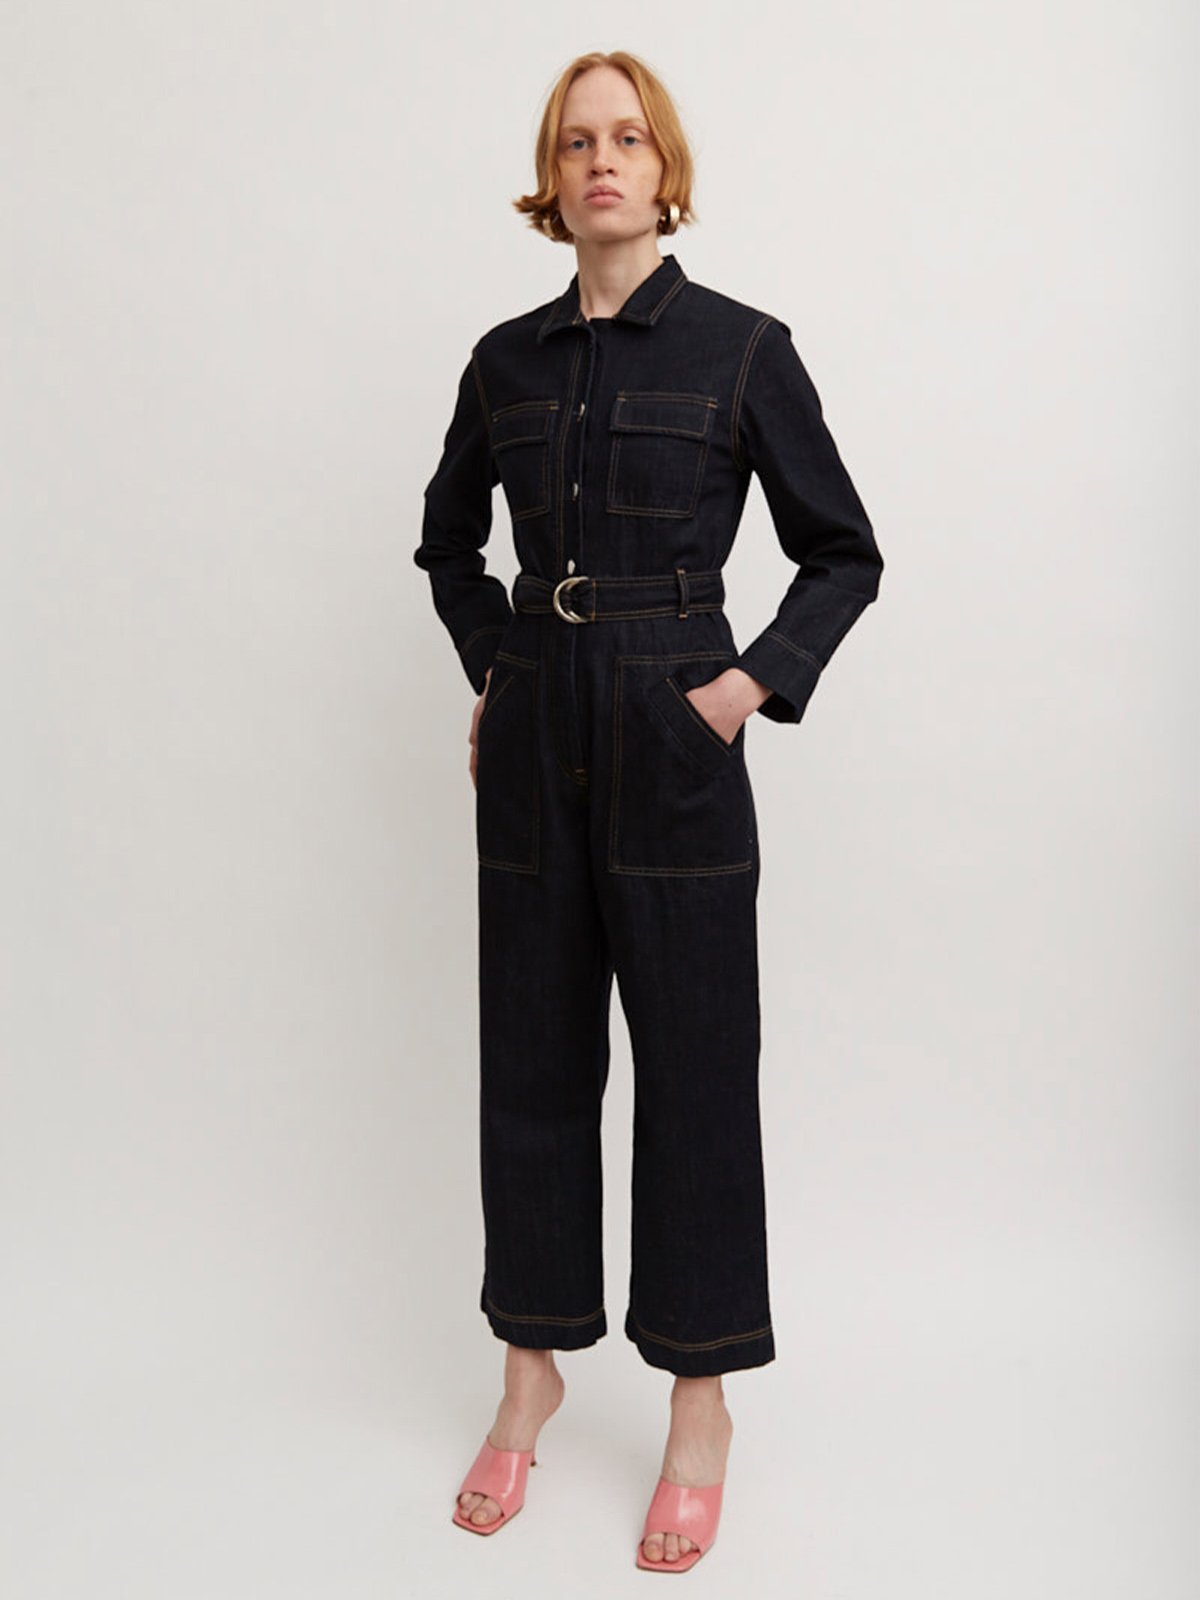 I never thought I'd buy a boilersuit, until I found this Topshop dream |  IMAGE.ie